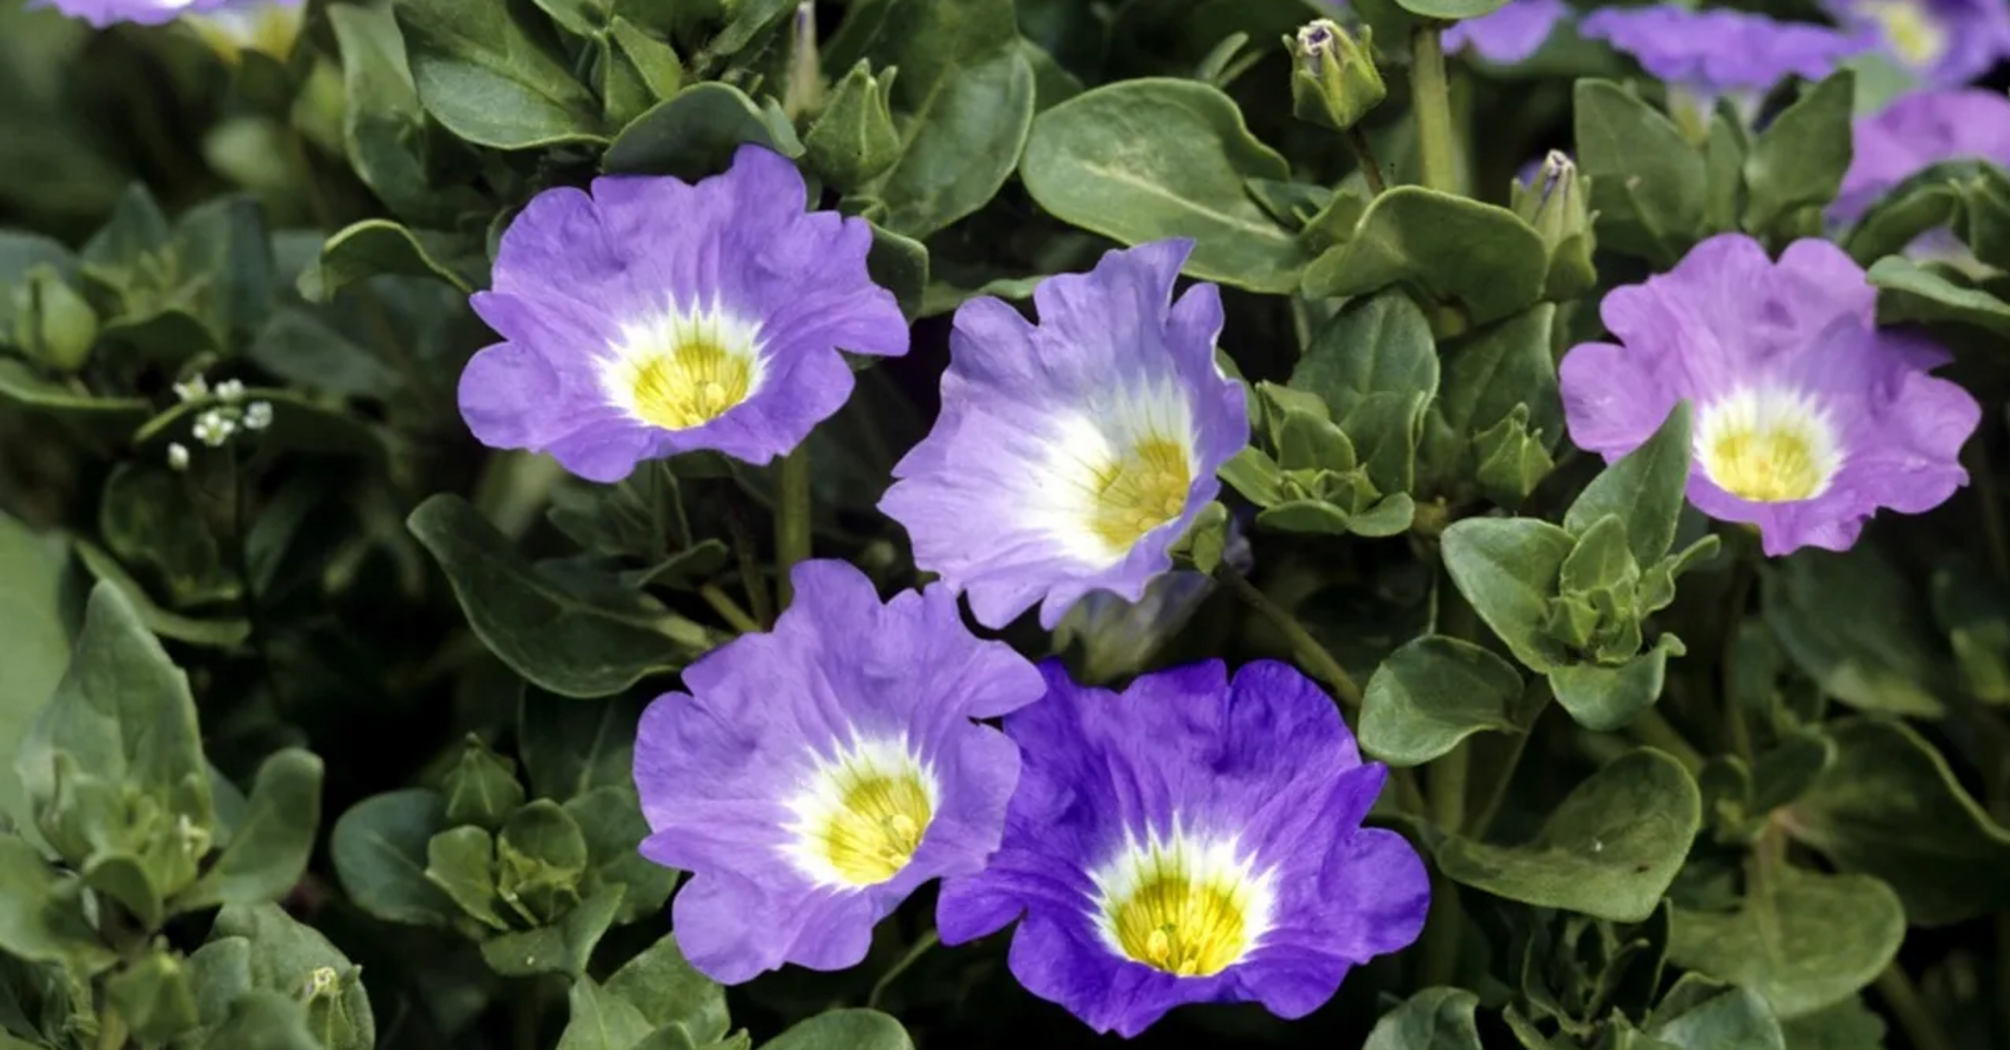 You don't have to water it at all: this flower is a perfect option for your summer garden